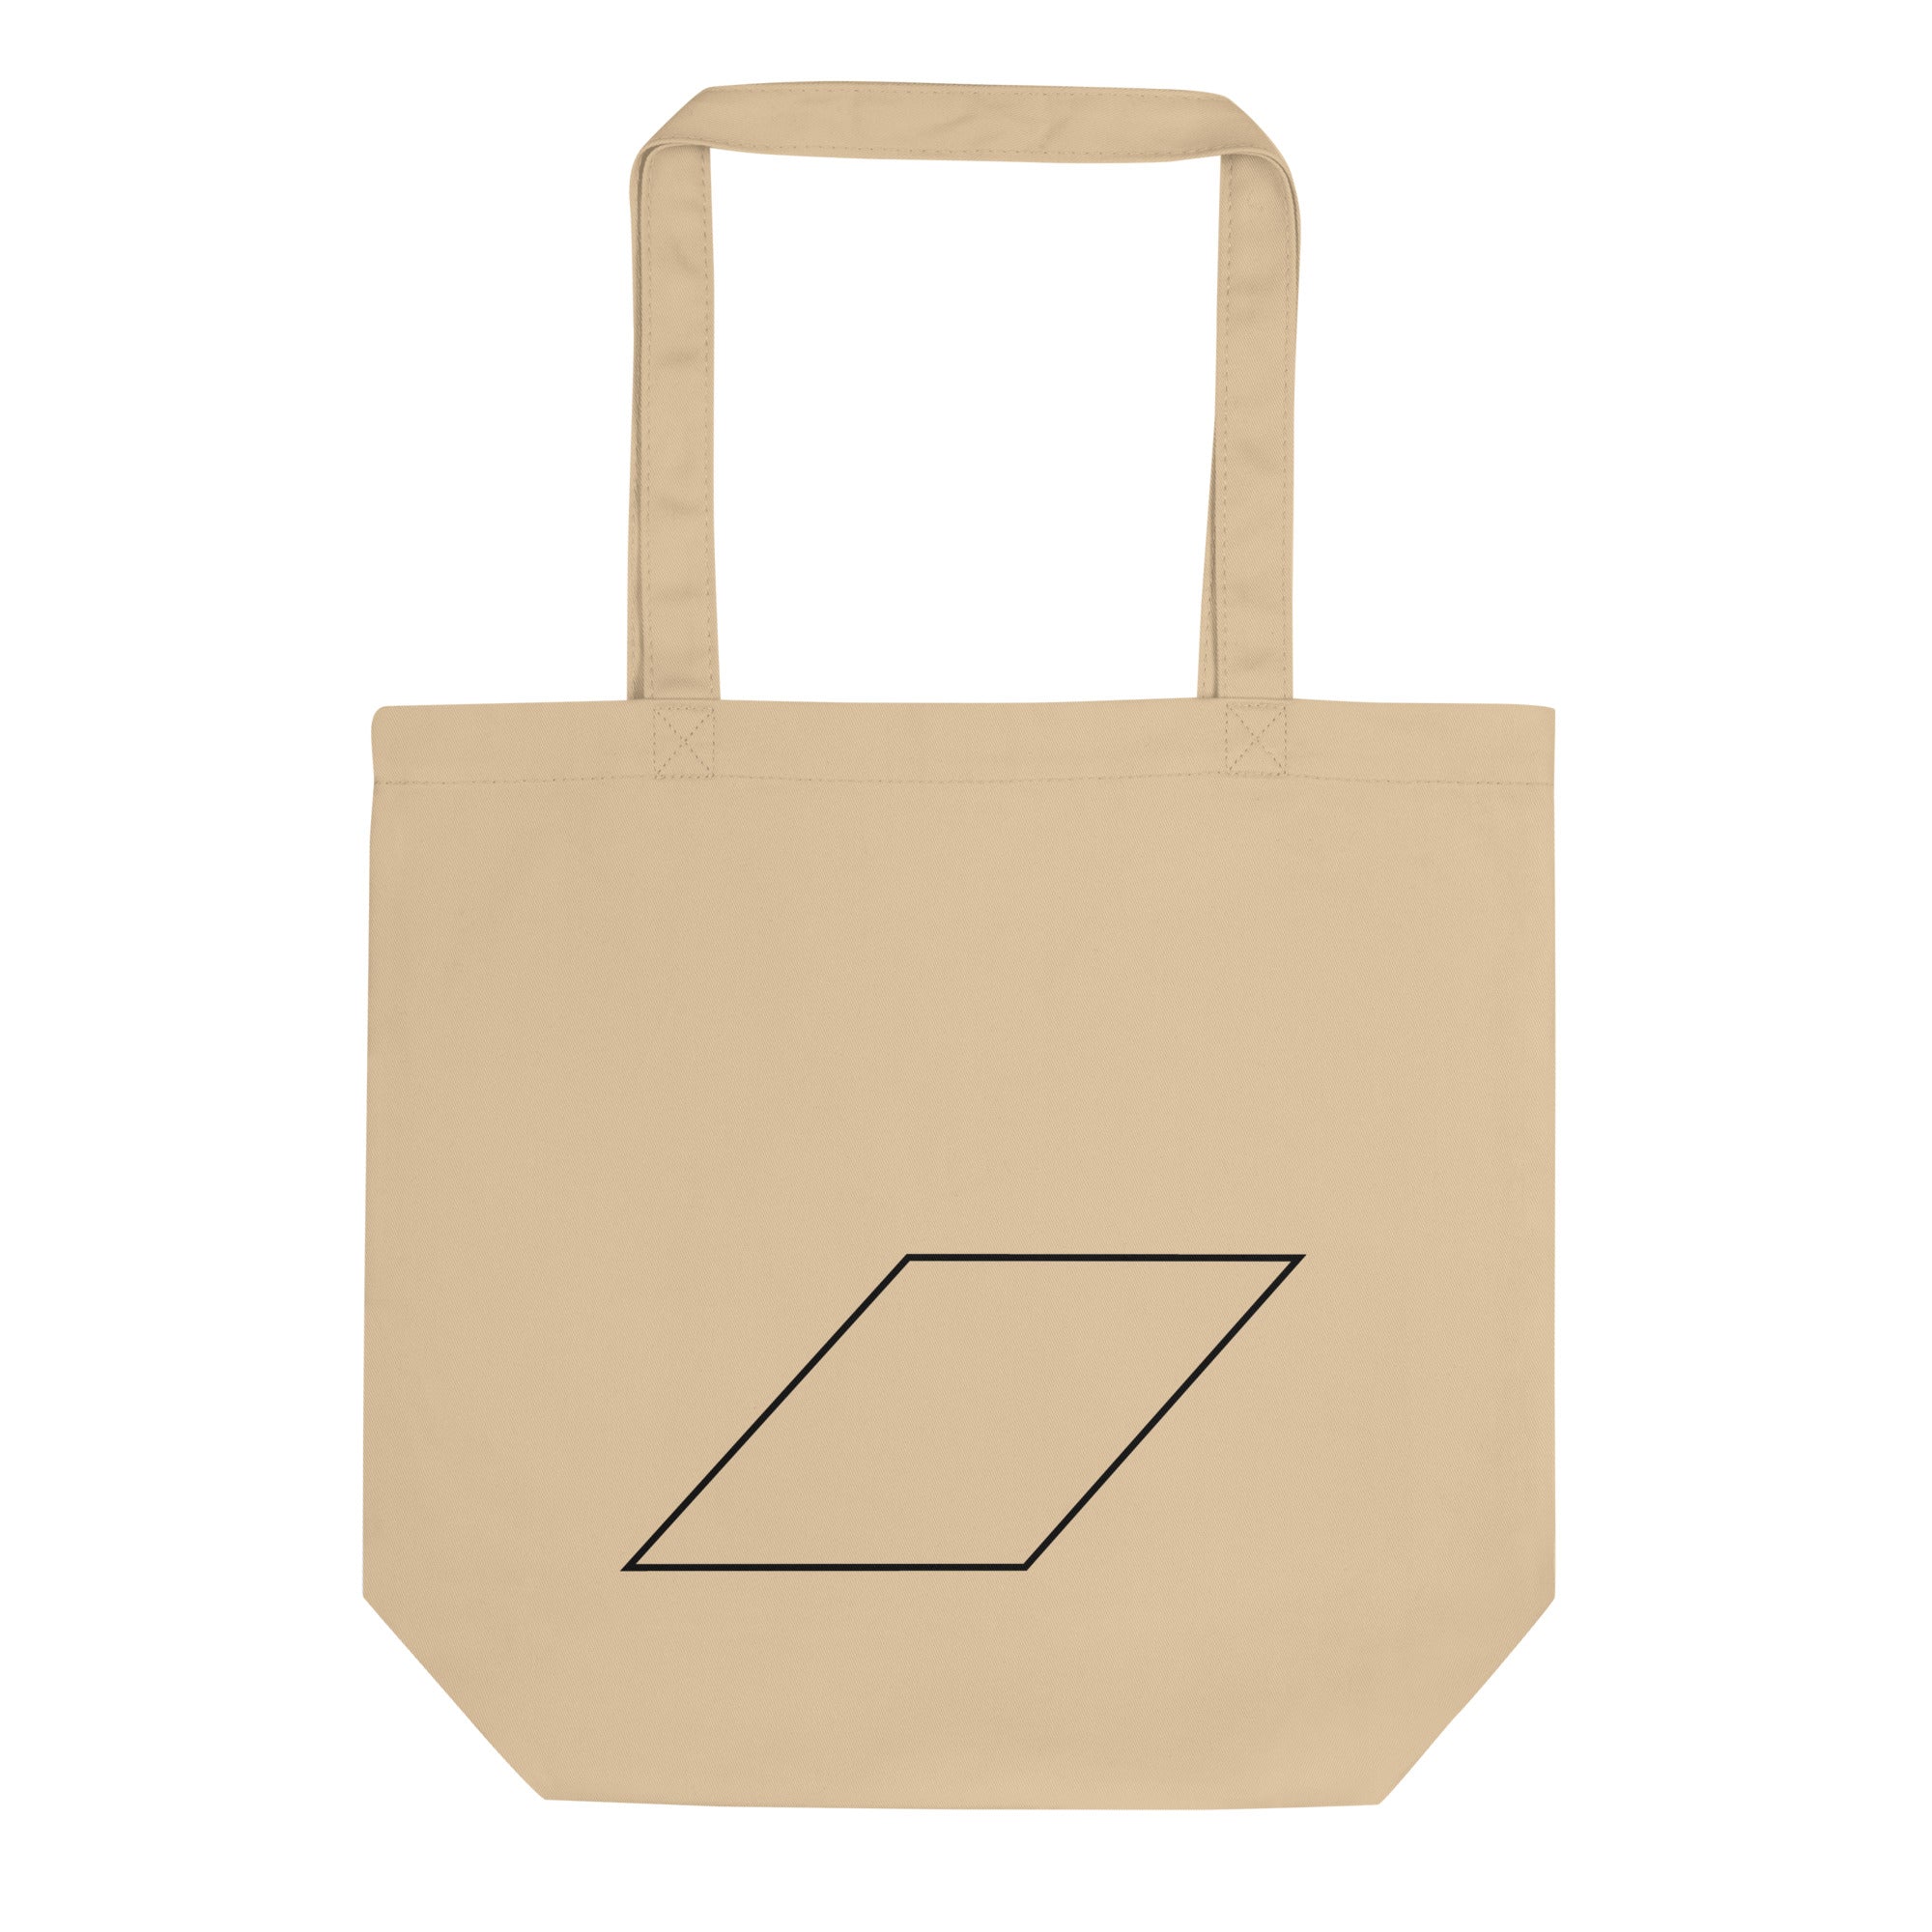 CAMH 75 Parallelogram Tote